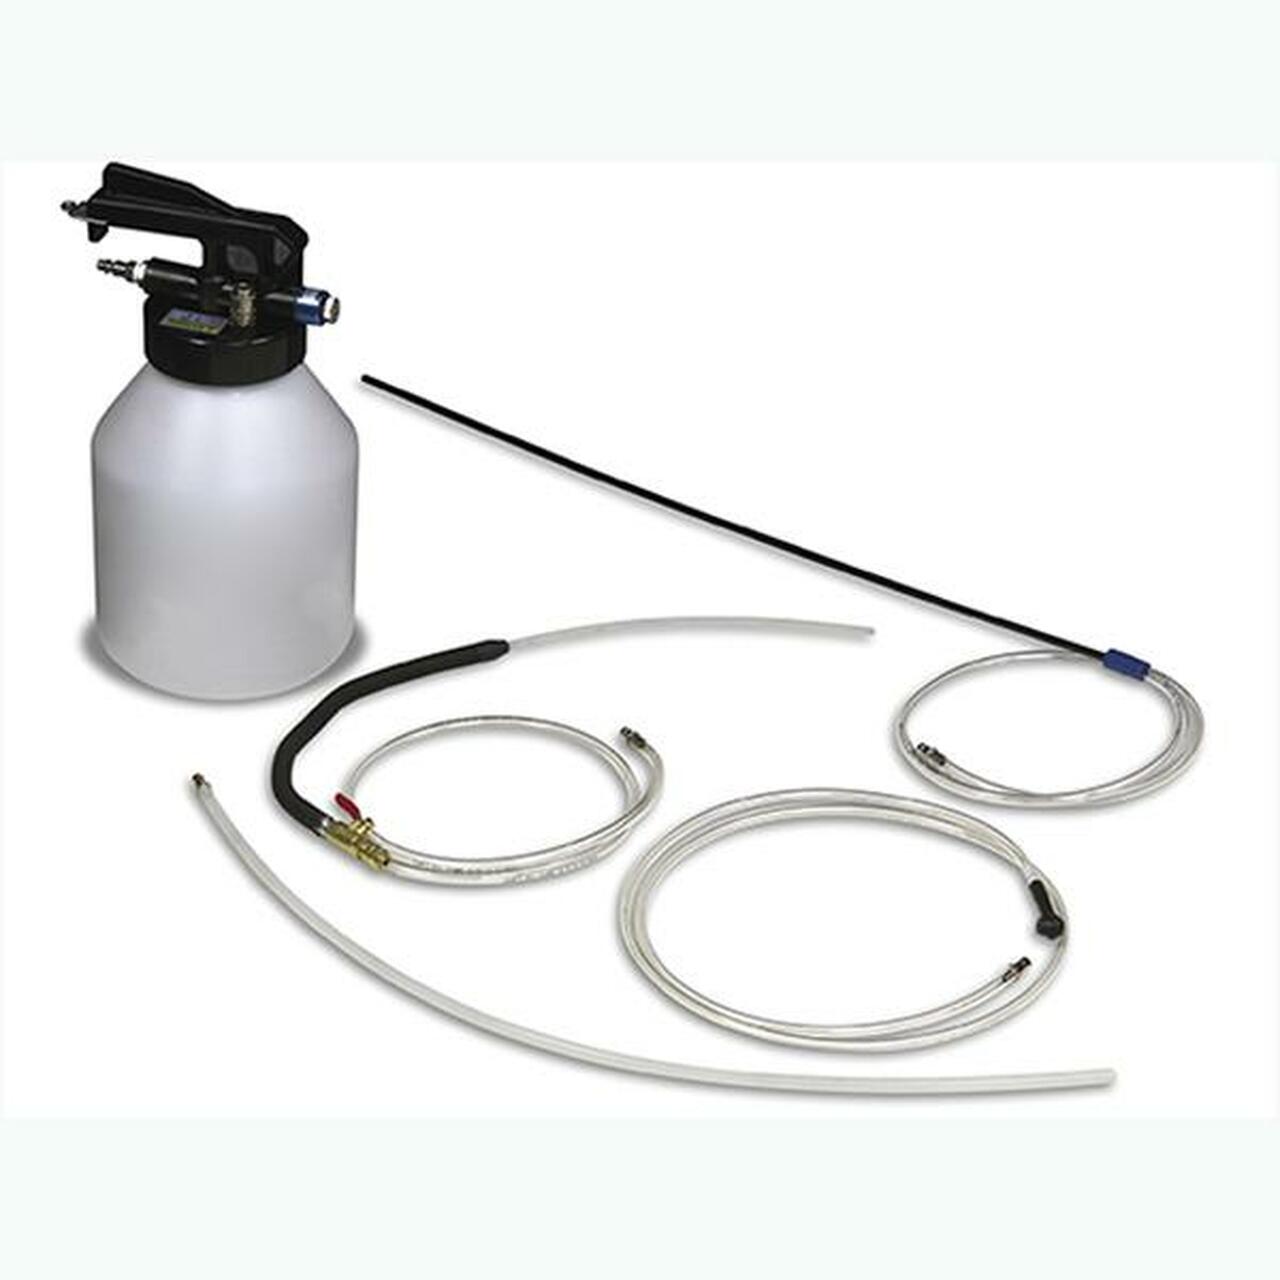 FHS-100 — Mahle — 430 80004 00 — Fluid Handling System, air-operated, empty and fill